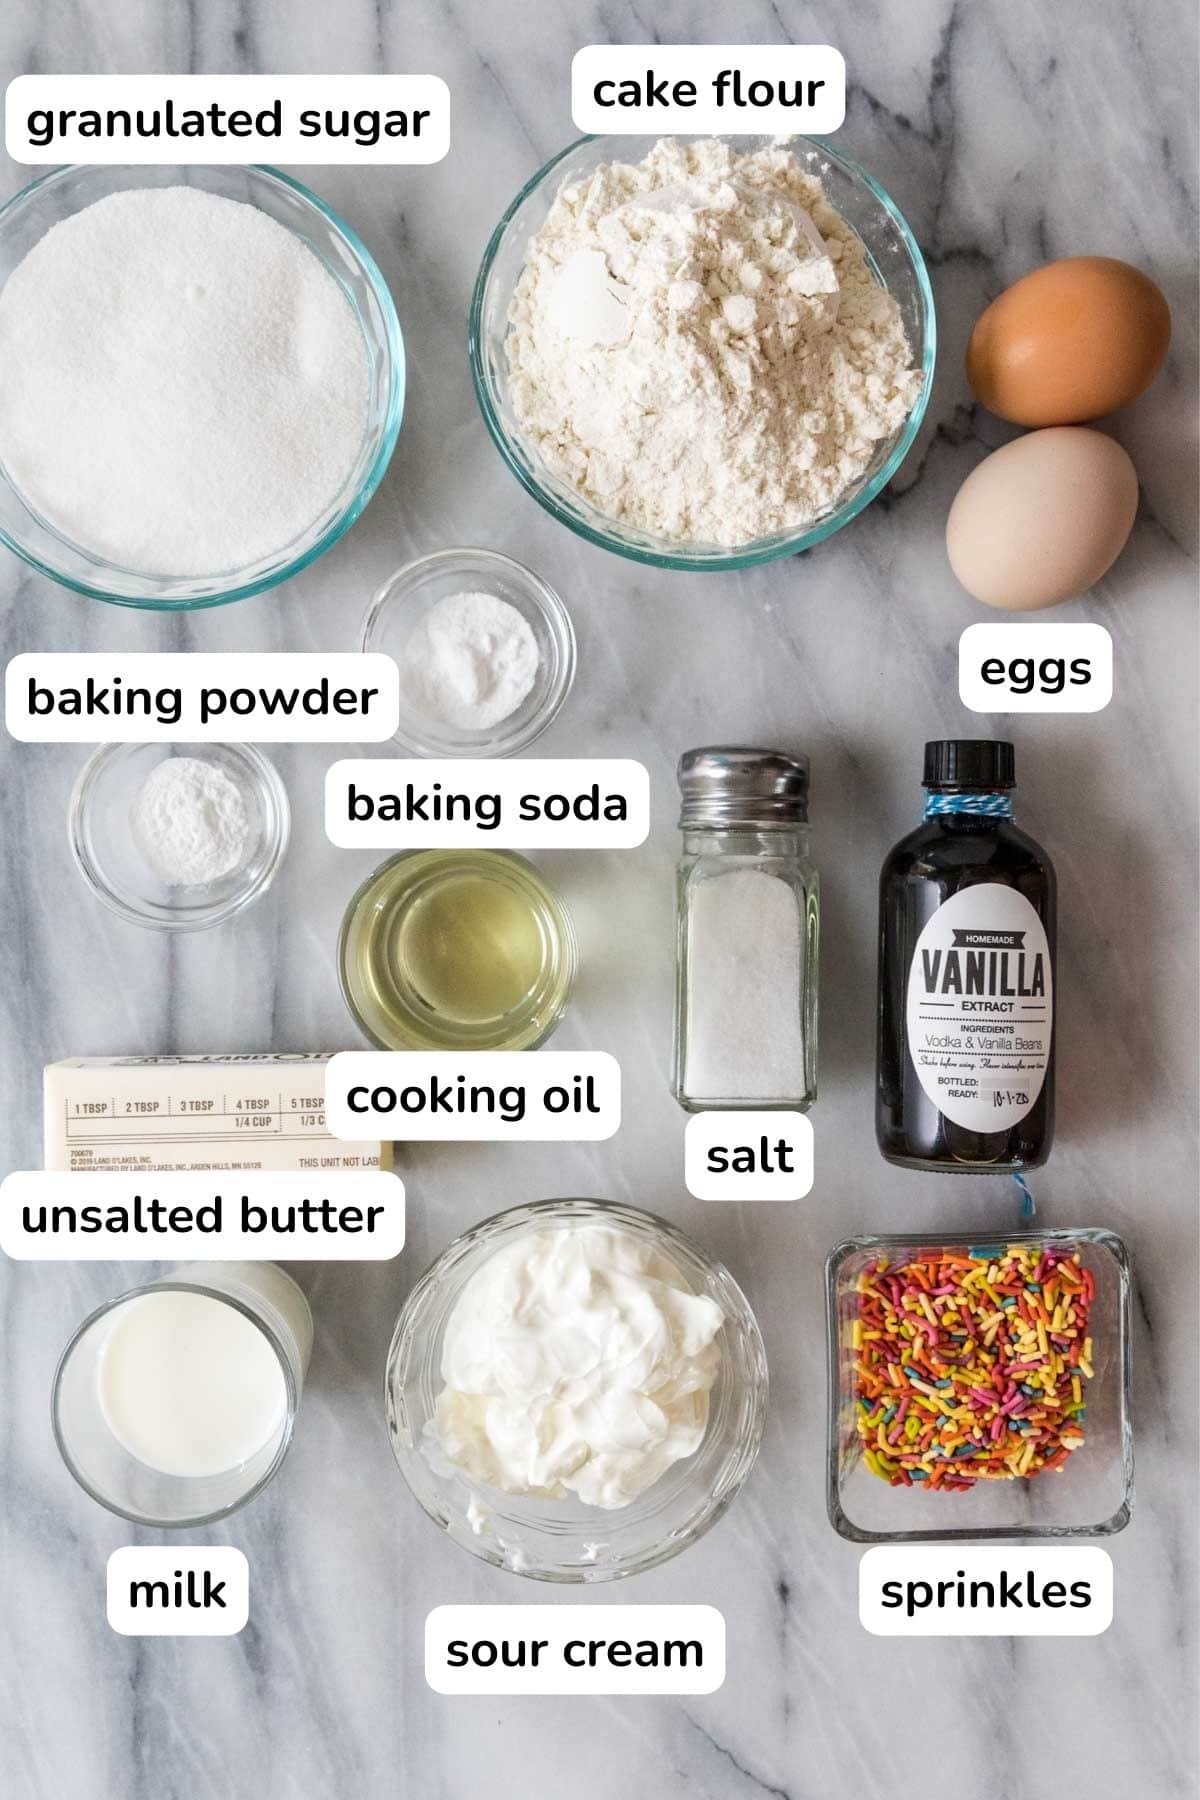 Overhead view of labelled ingredients including flour, sugar, eggs, sprinkles, and more.